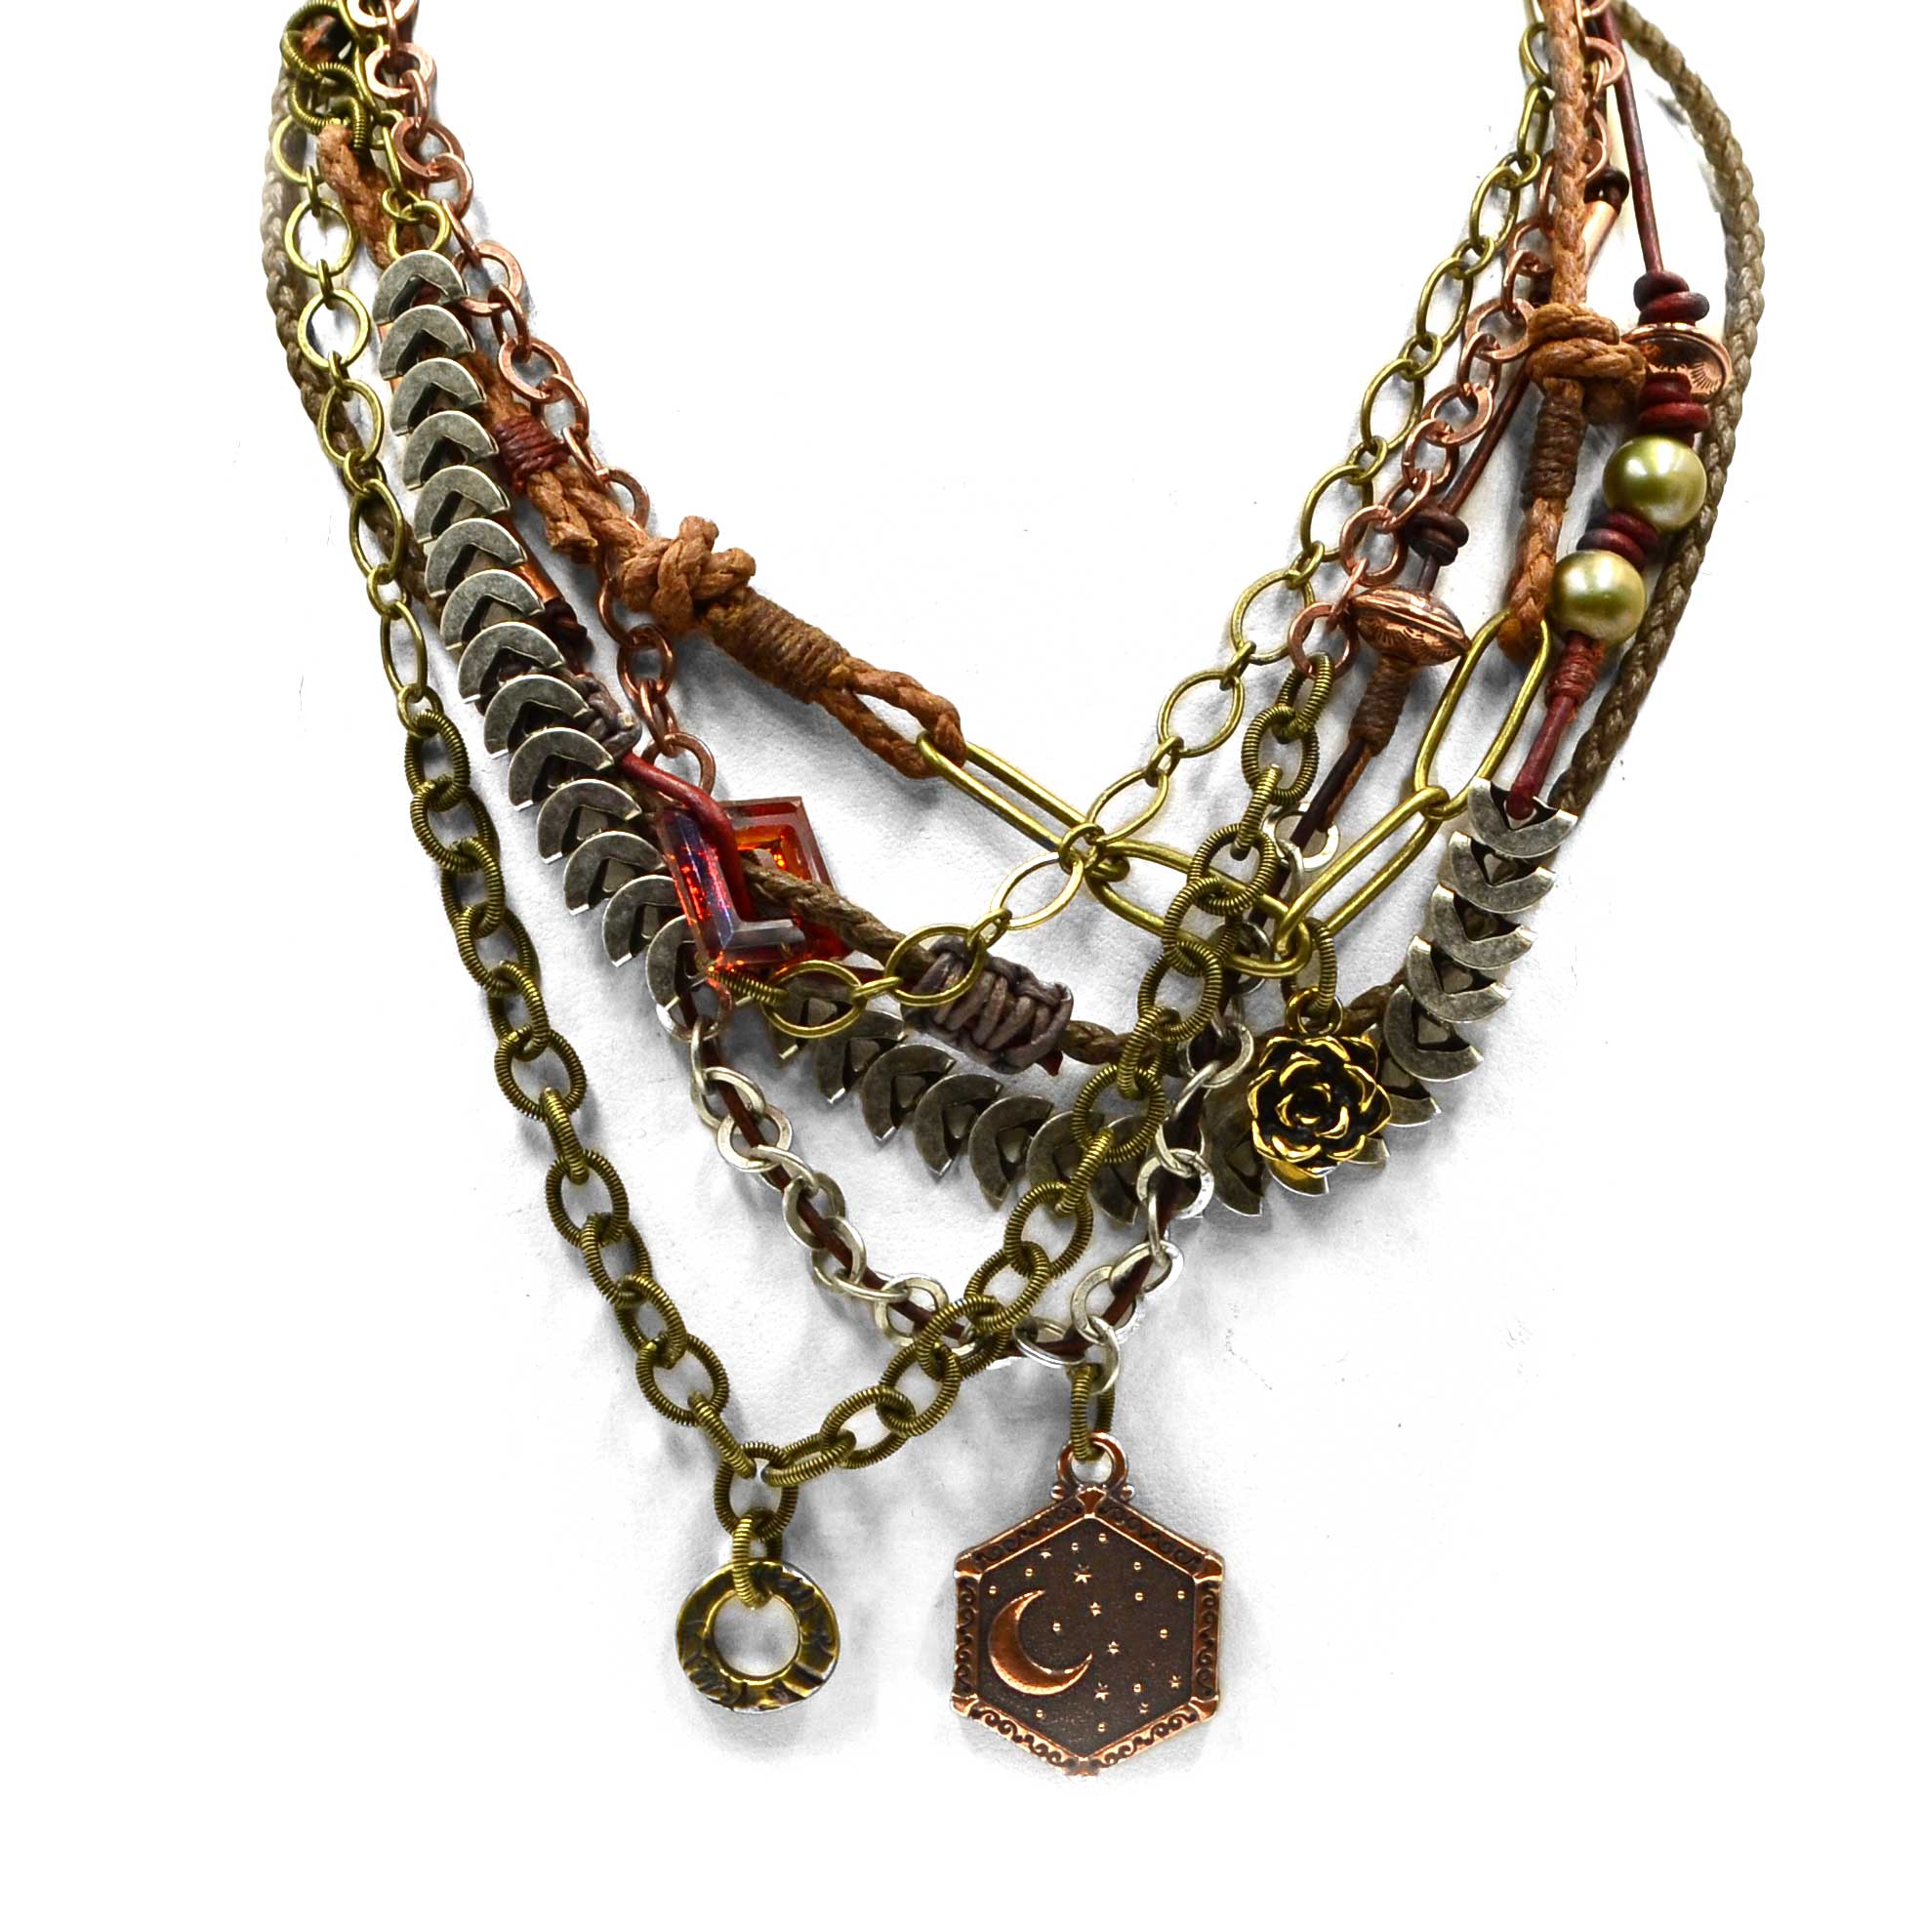 Leather and Chain Improv Necklace<br>4.27.22